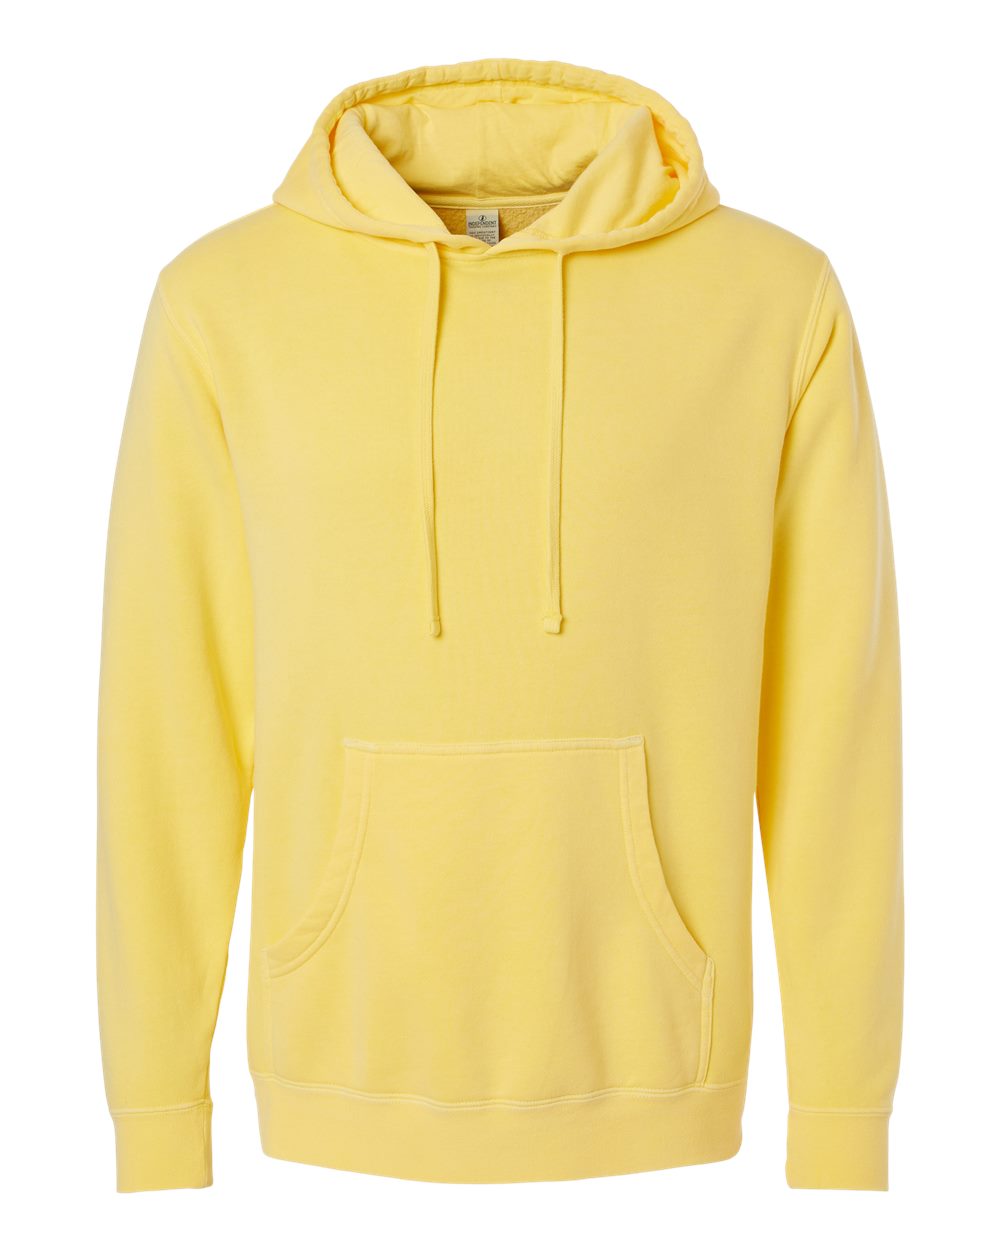 Independent Pigment-Dyed Hoodie (PRM4500) in Pigment Yellow